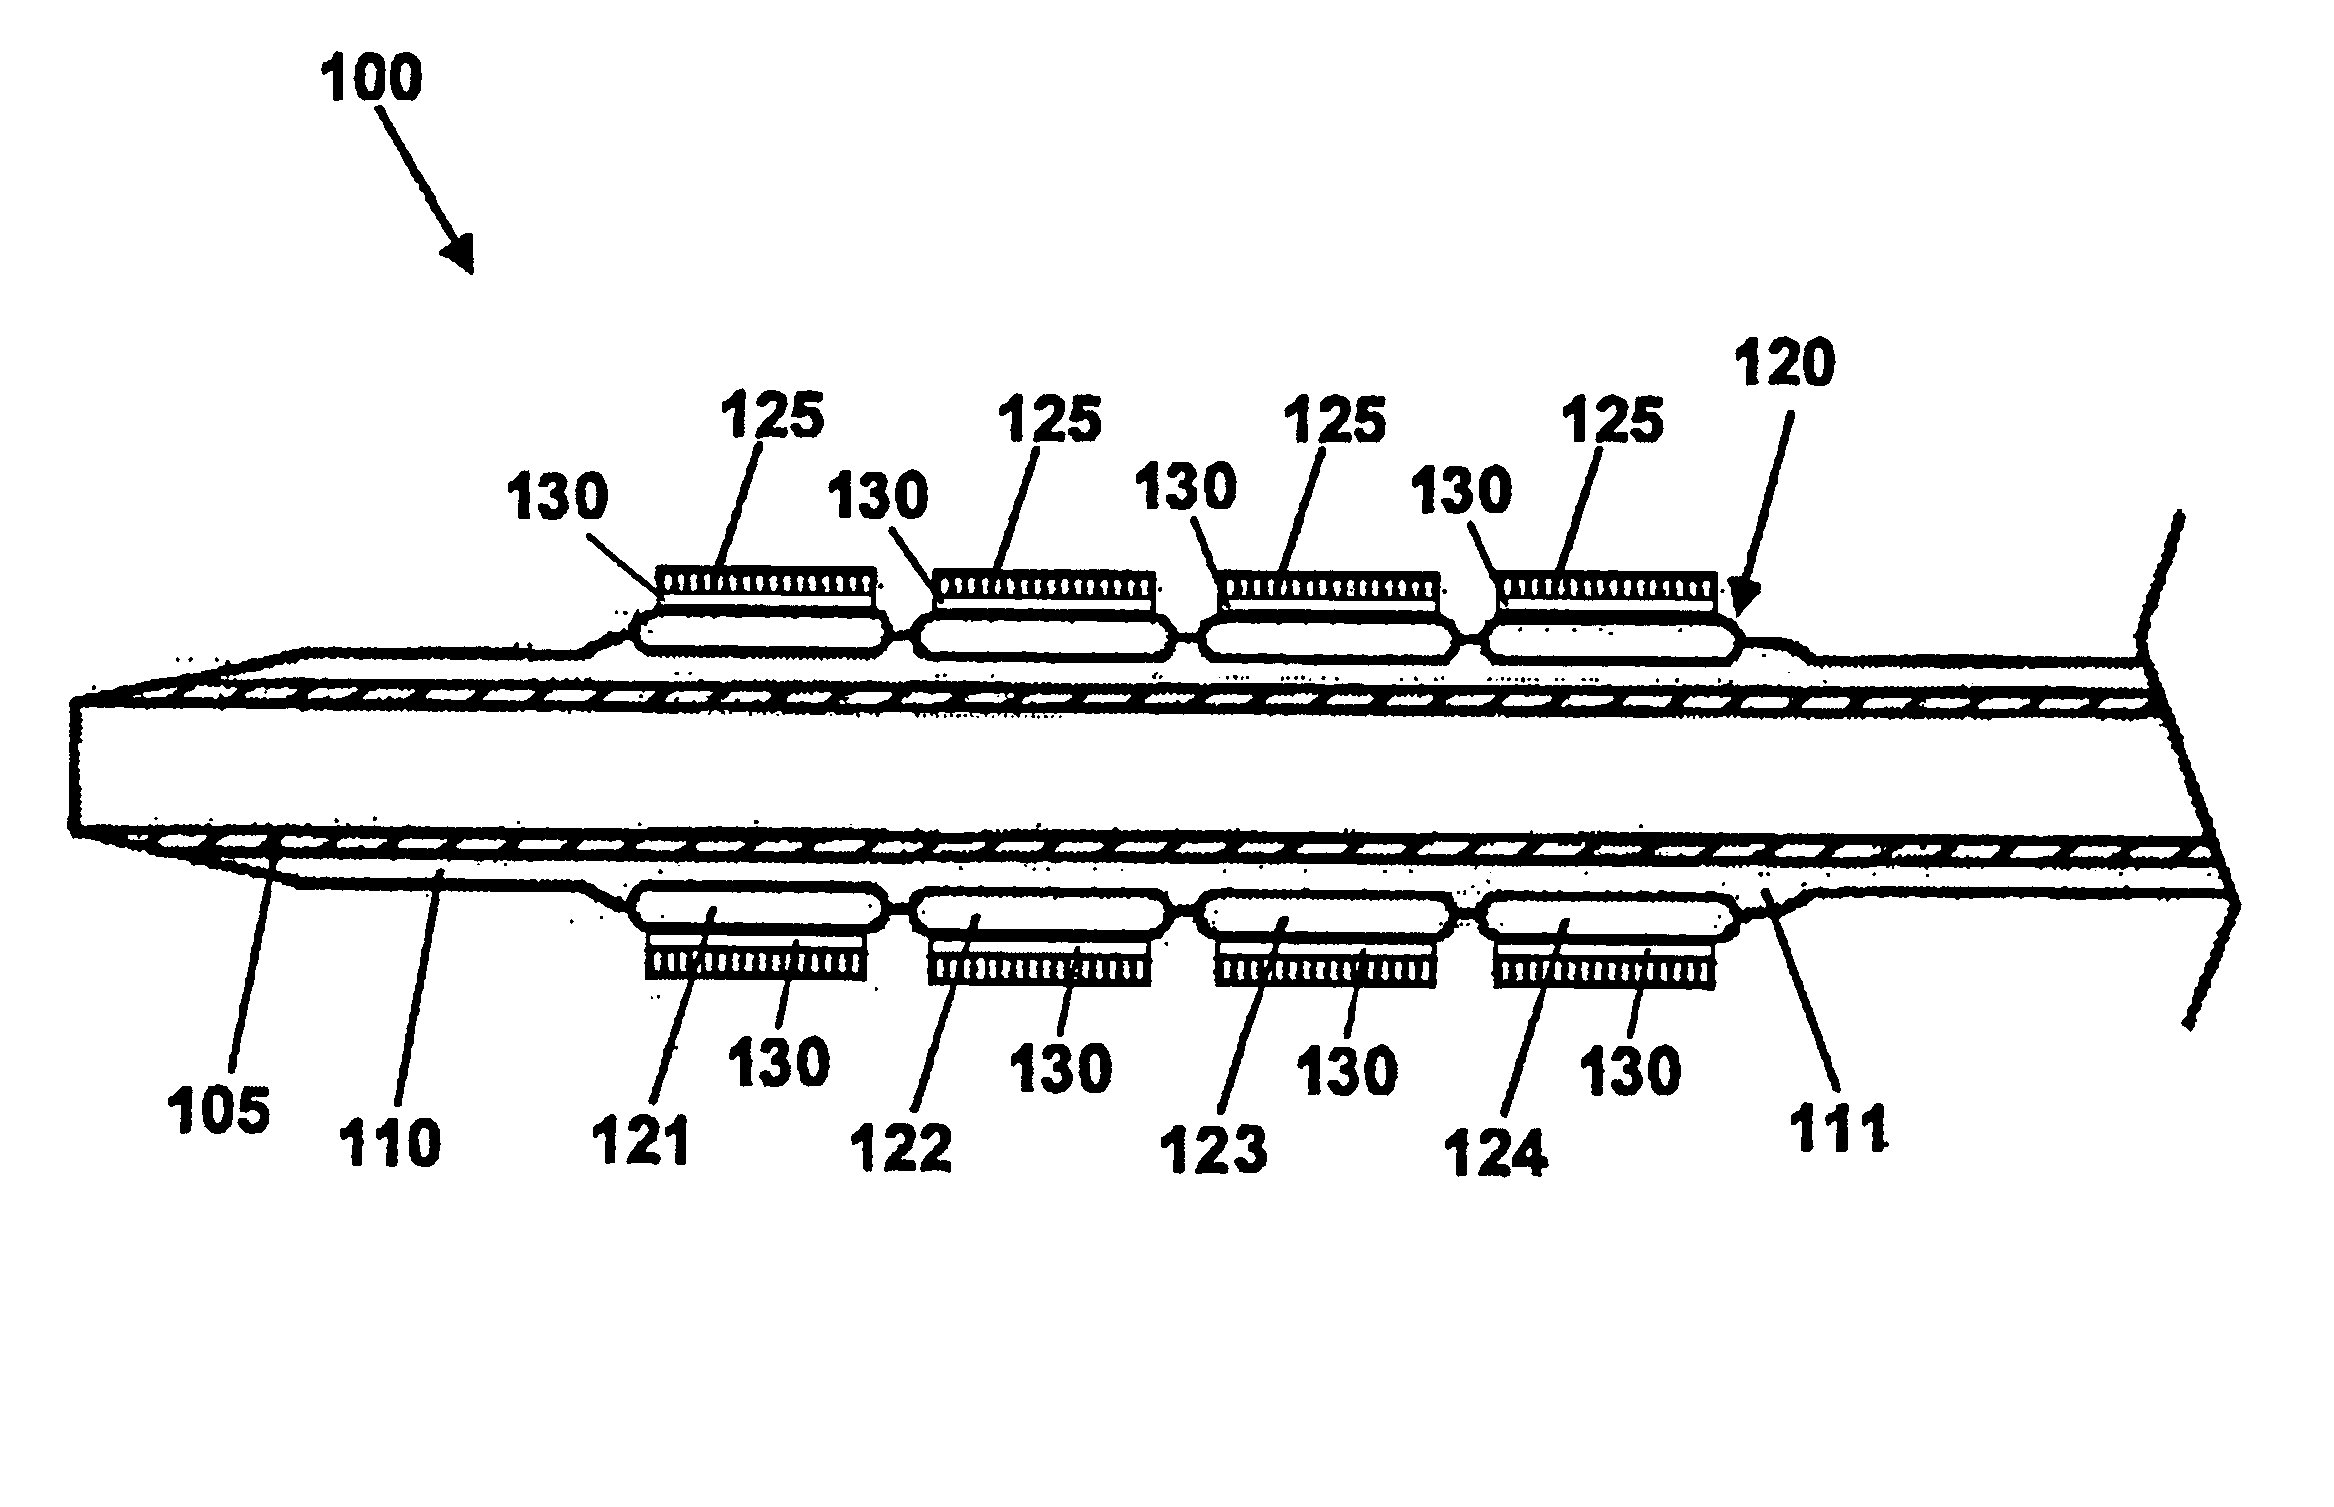 Gradient coated stent and method of fabrication